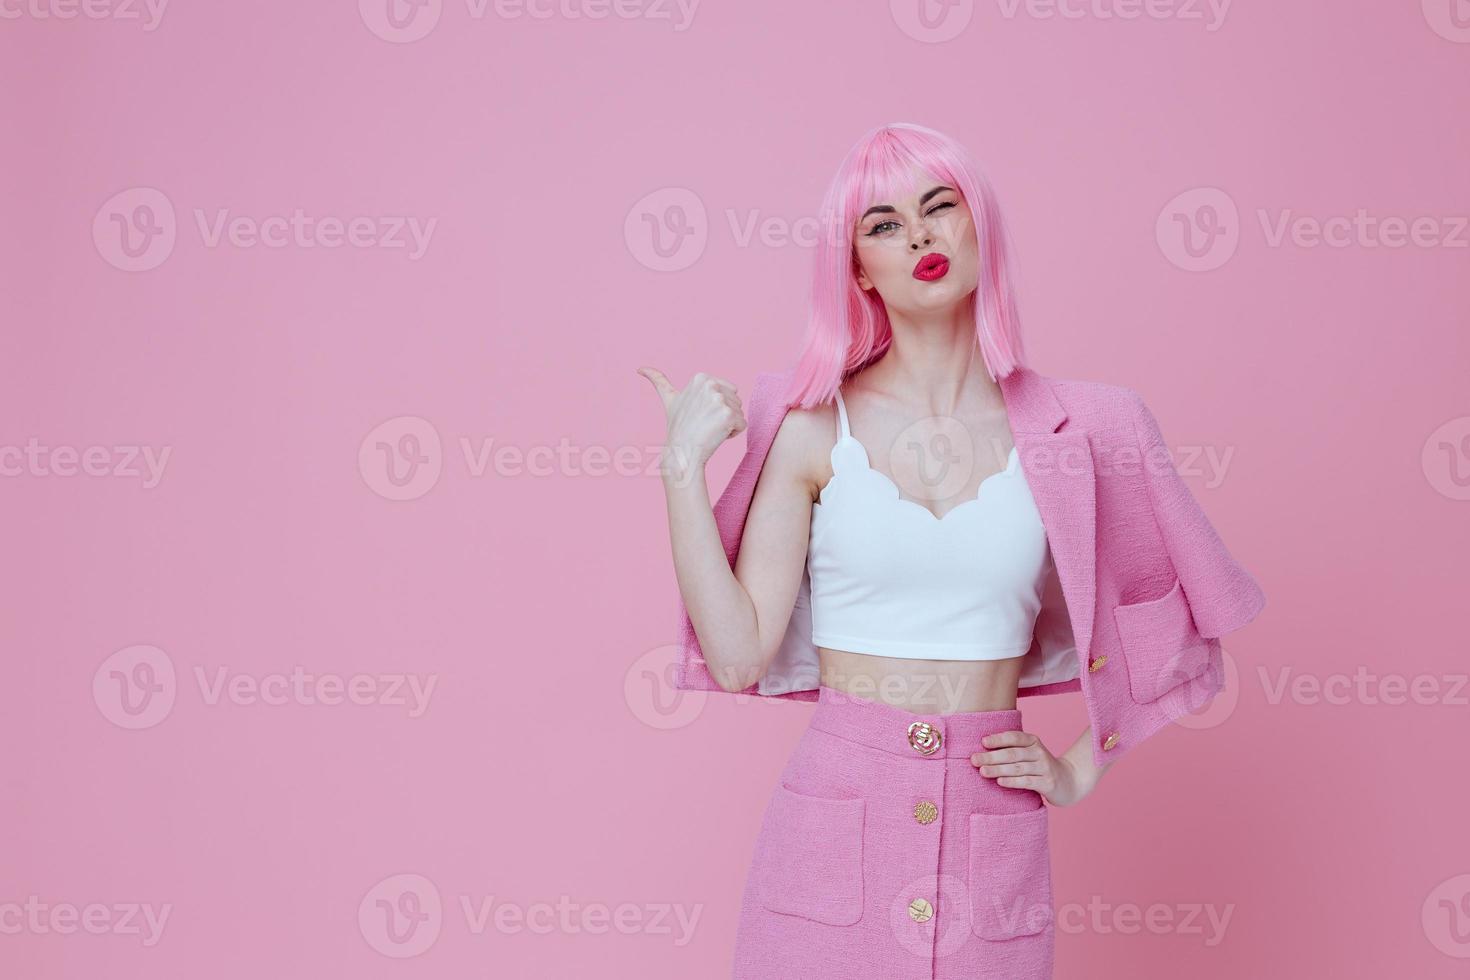 Beauty Fashion woman gestures with his hands with a pink jacket pink background unaltered photo